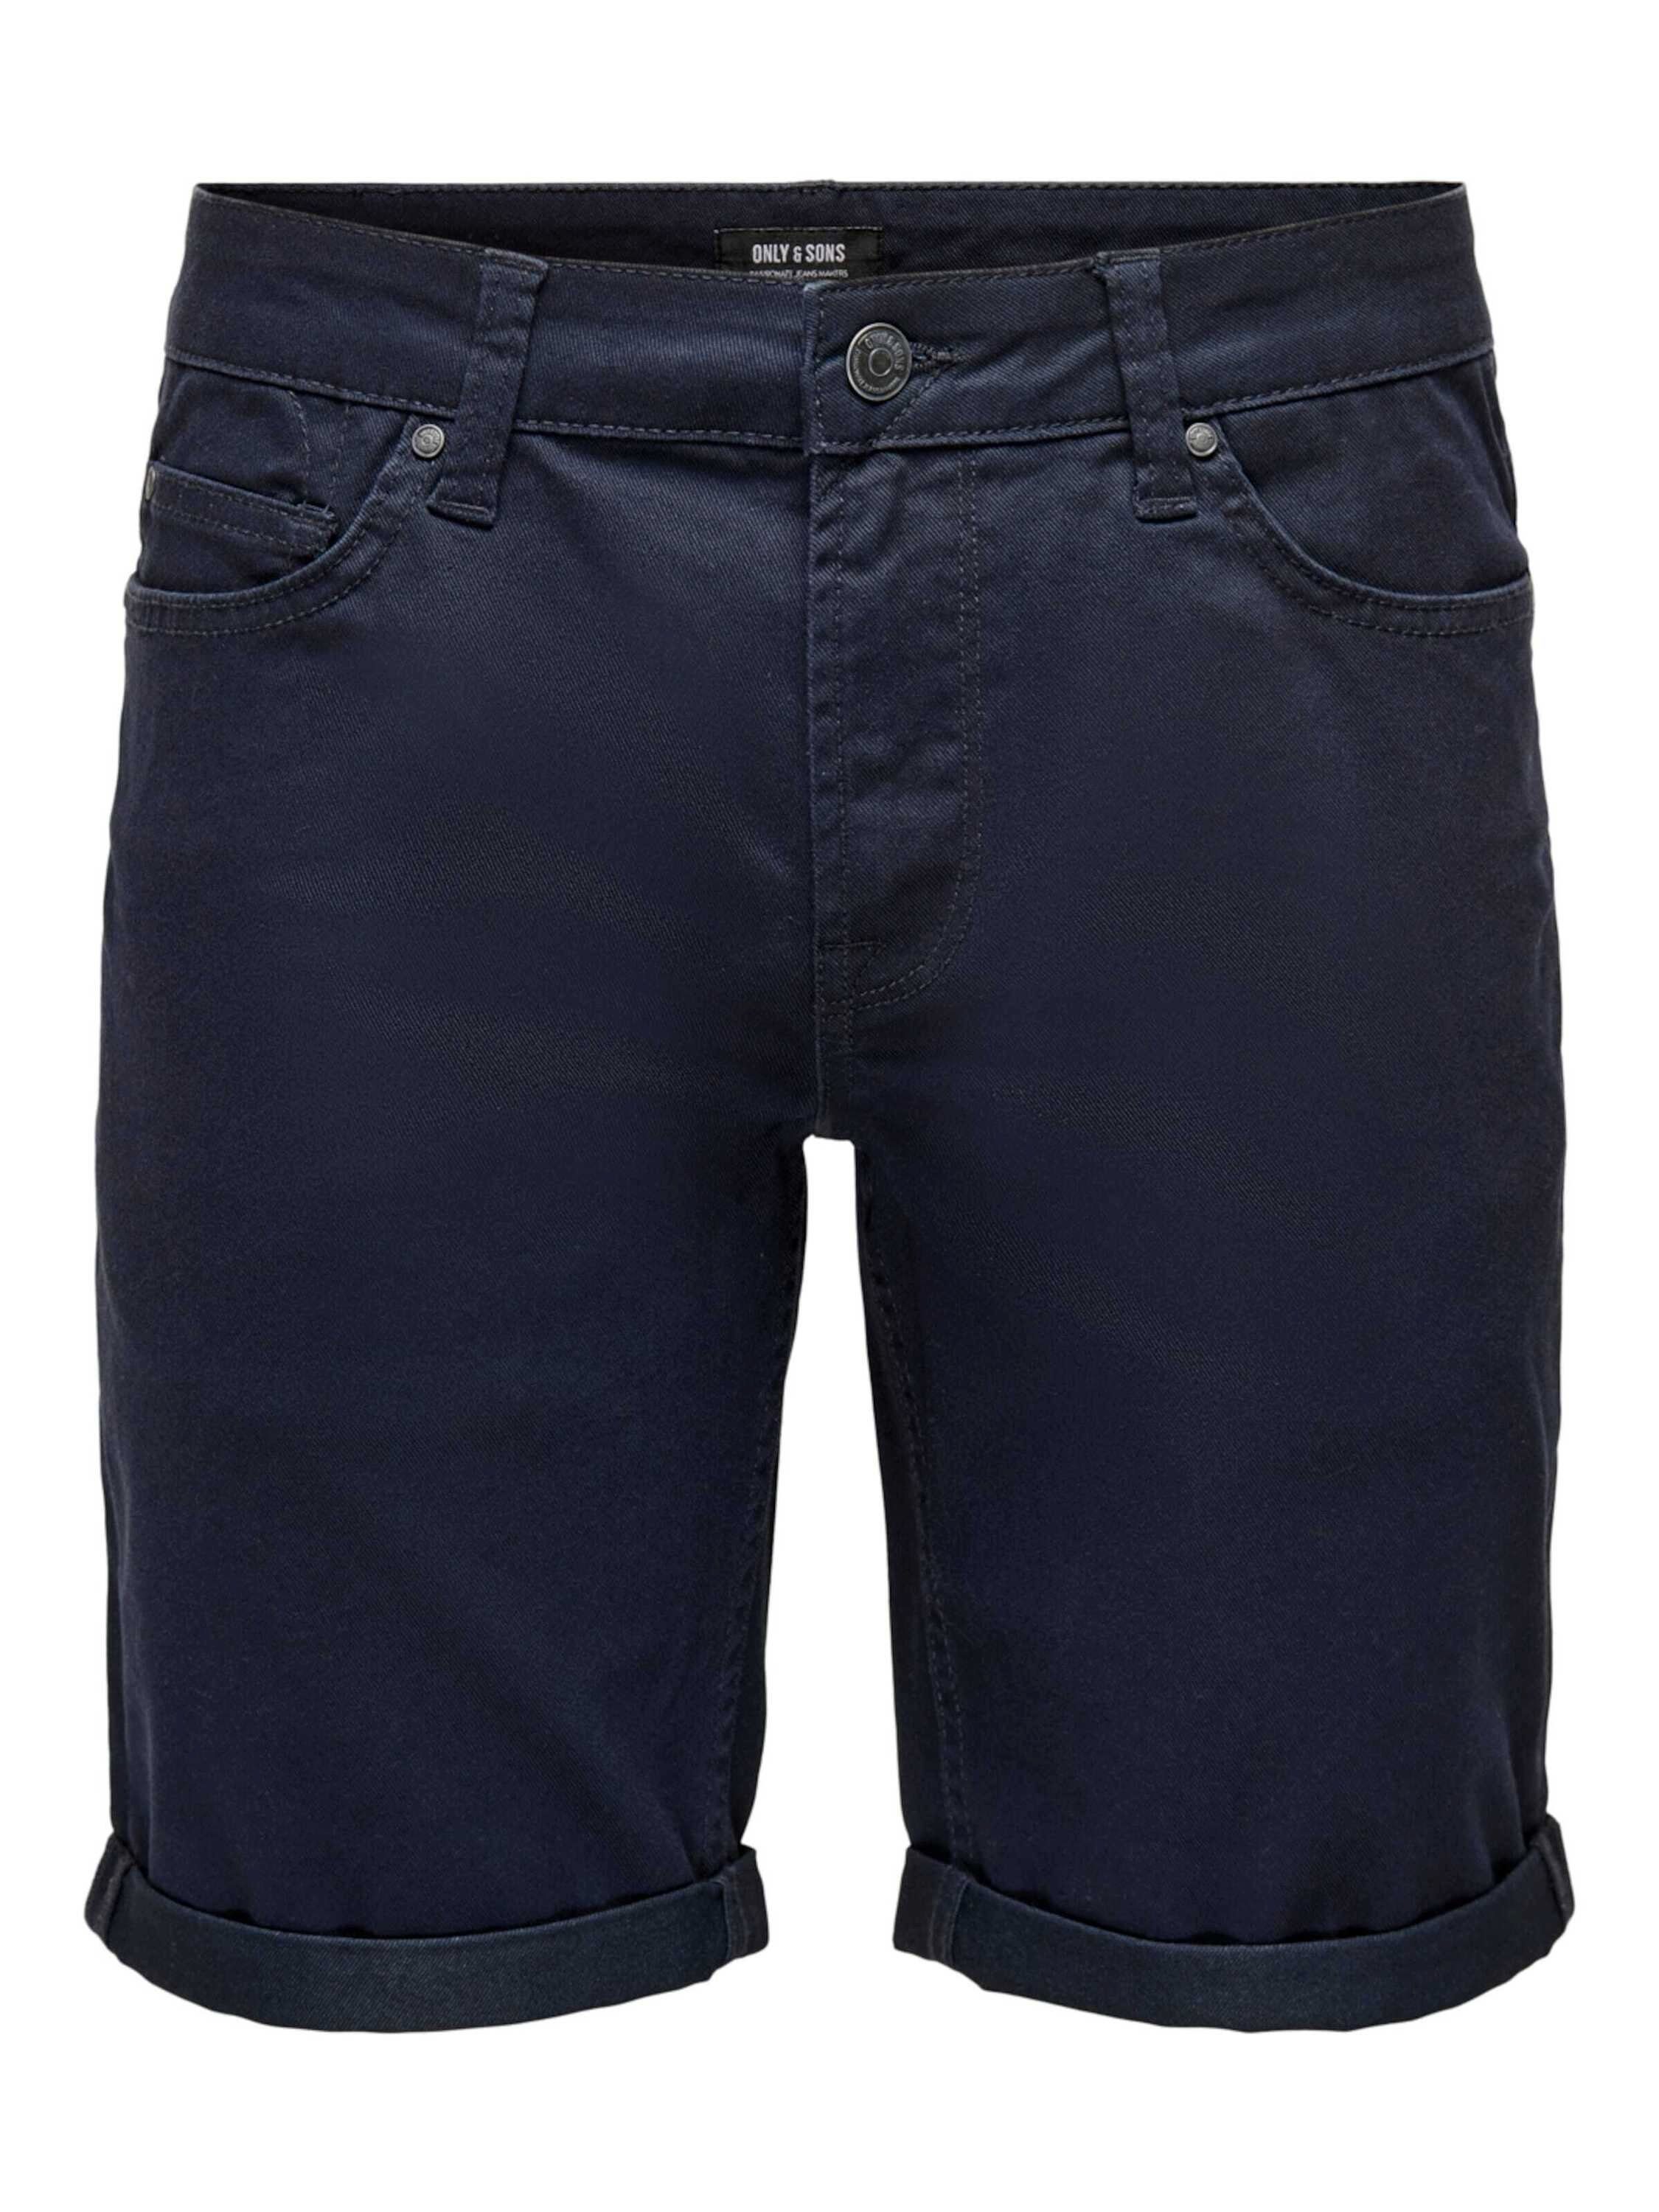 Ply (1-tlg) Chinoshorts & ONLY SONS